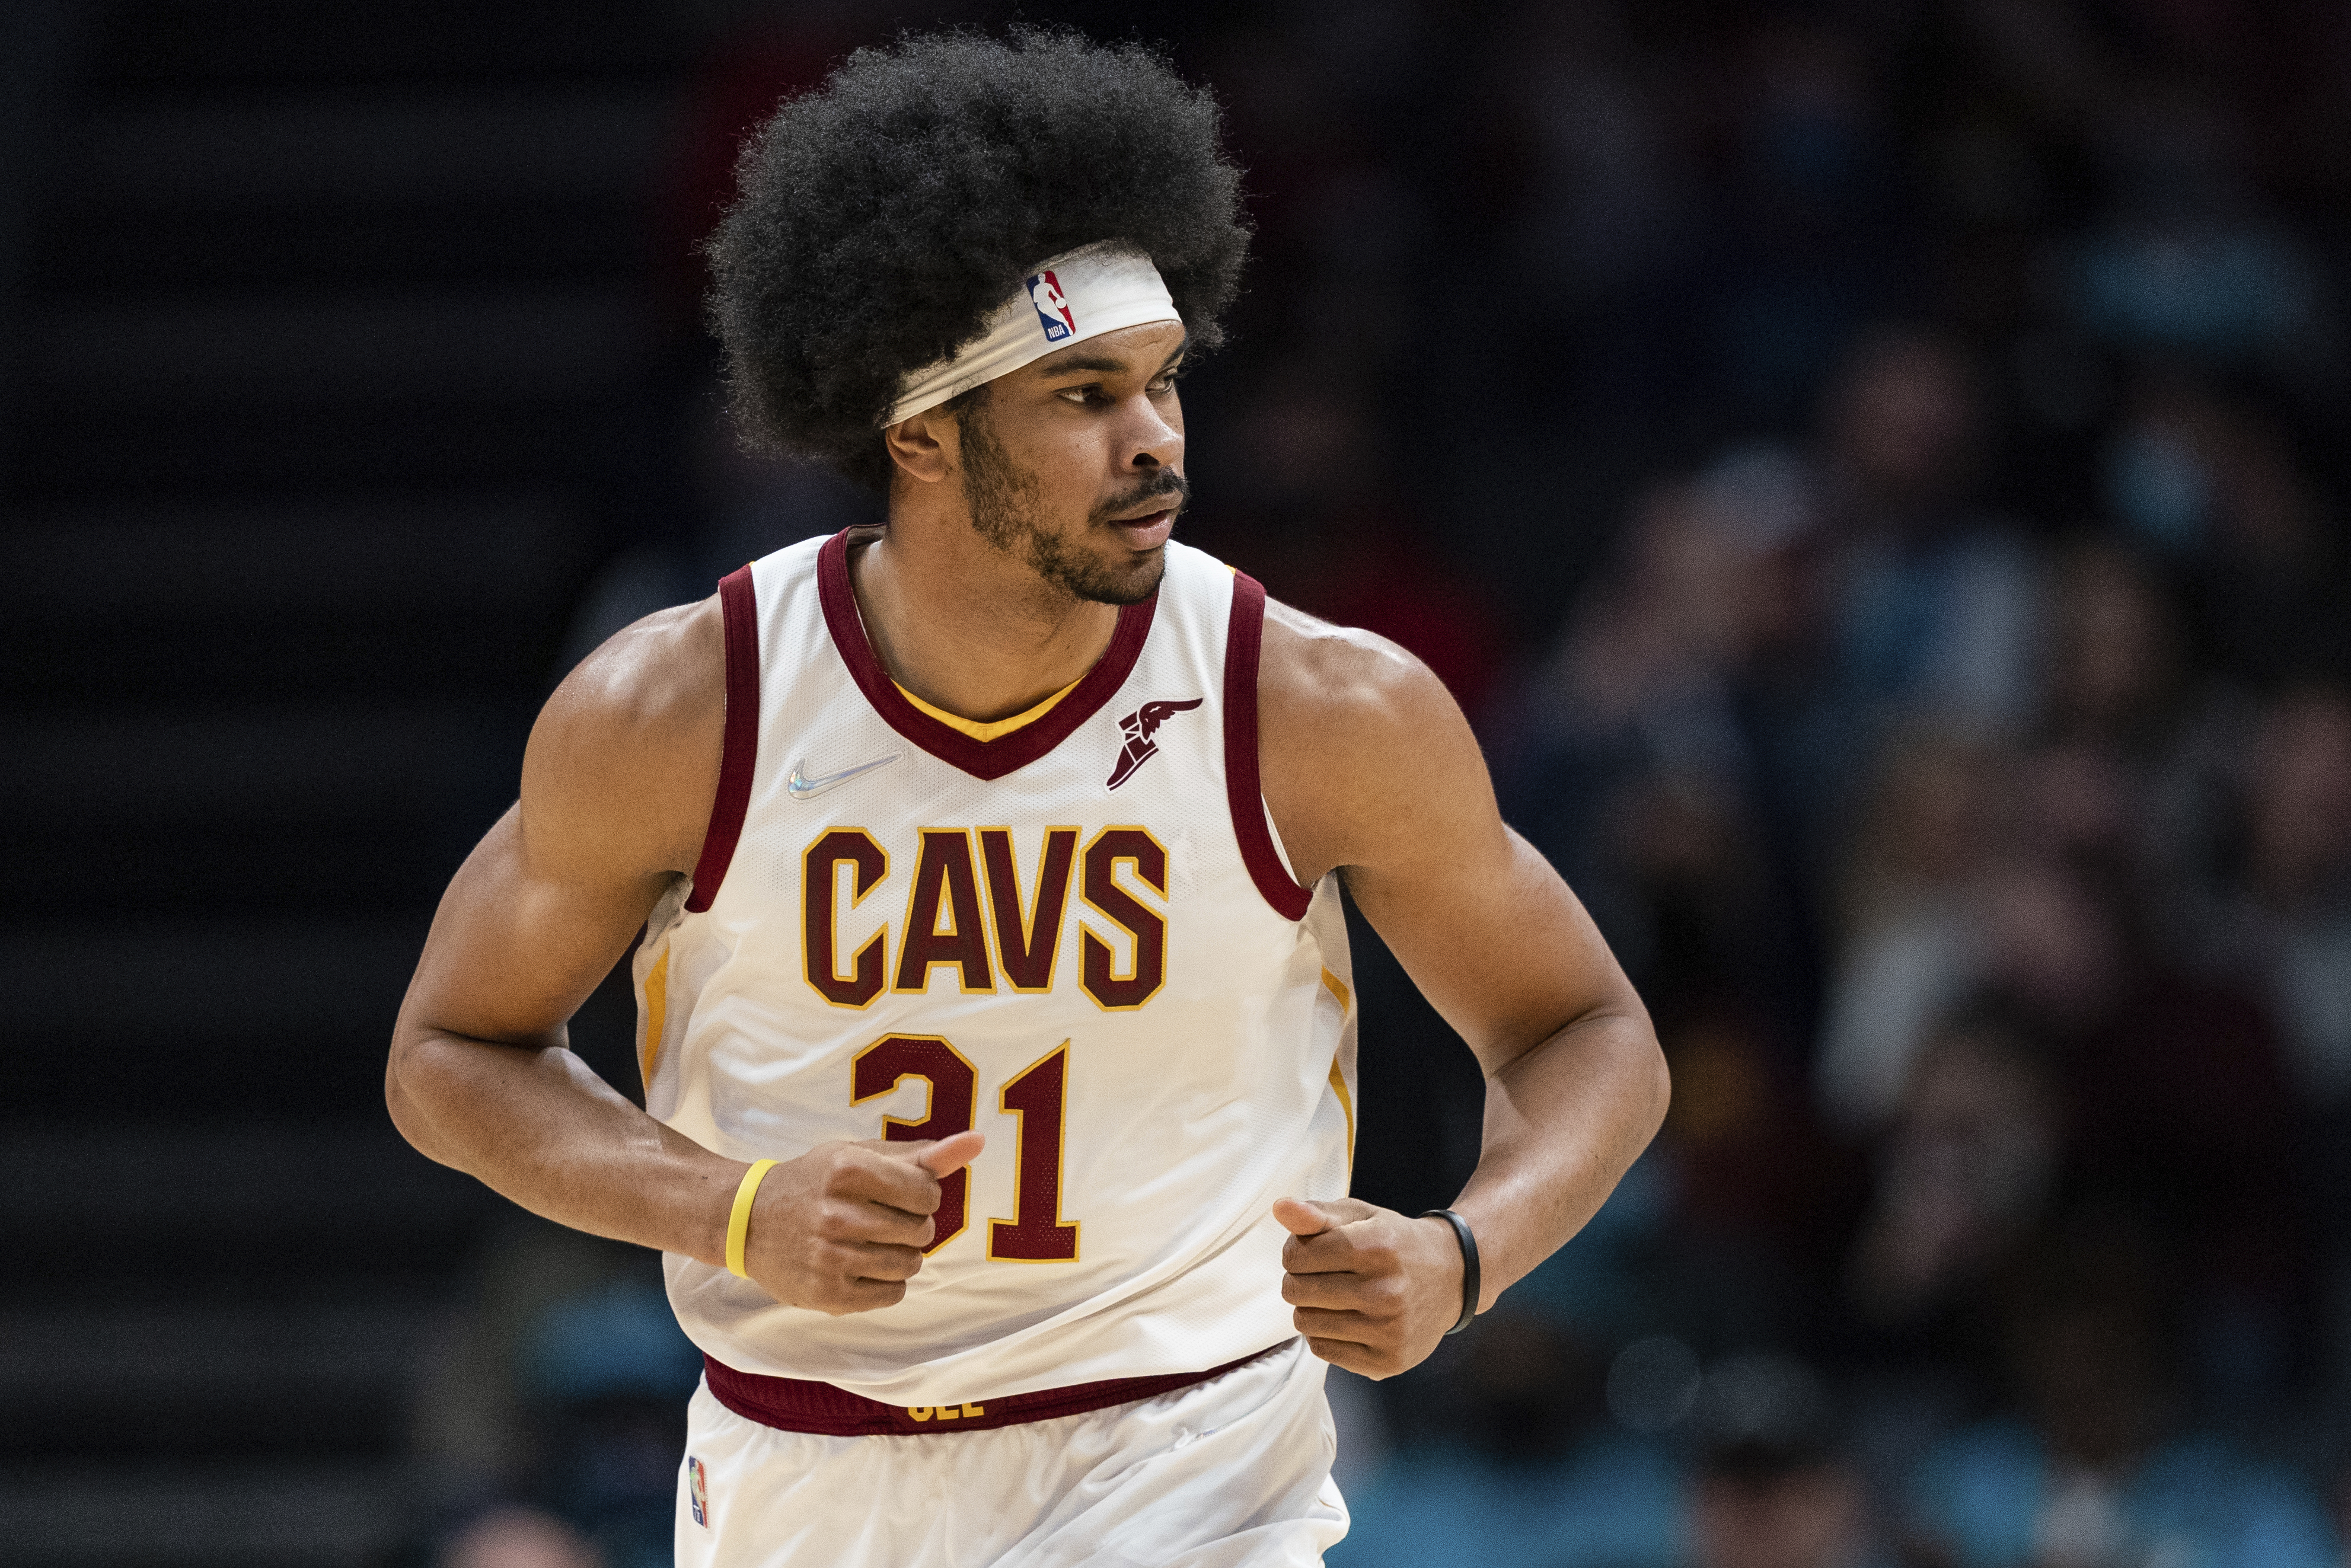 Jarrett Allen of the Cleveland Cavaliers has been playing in a